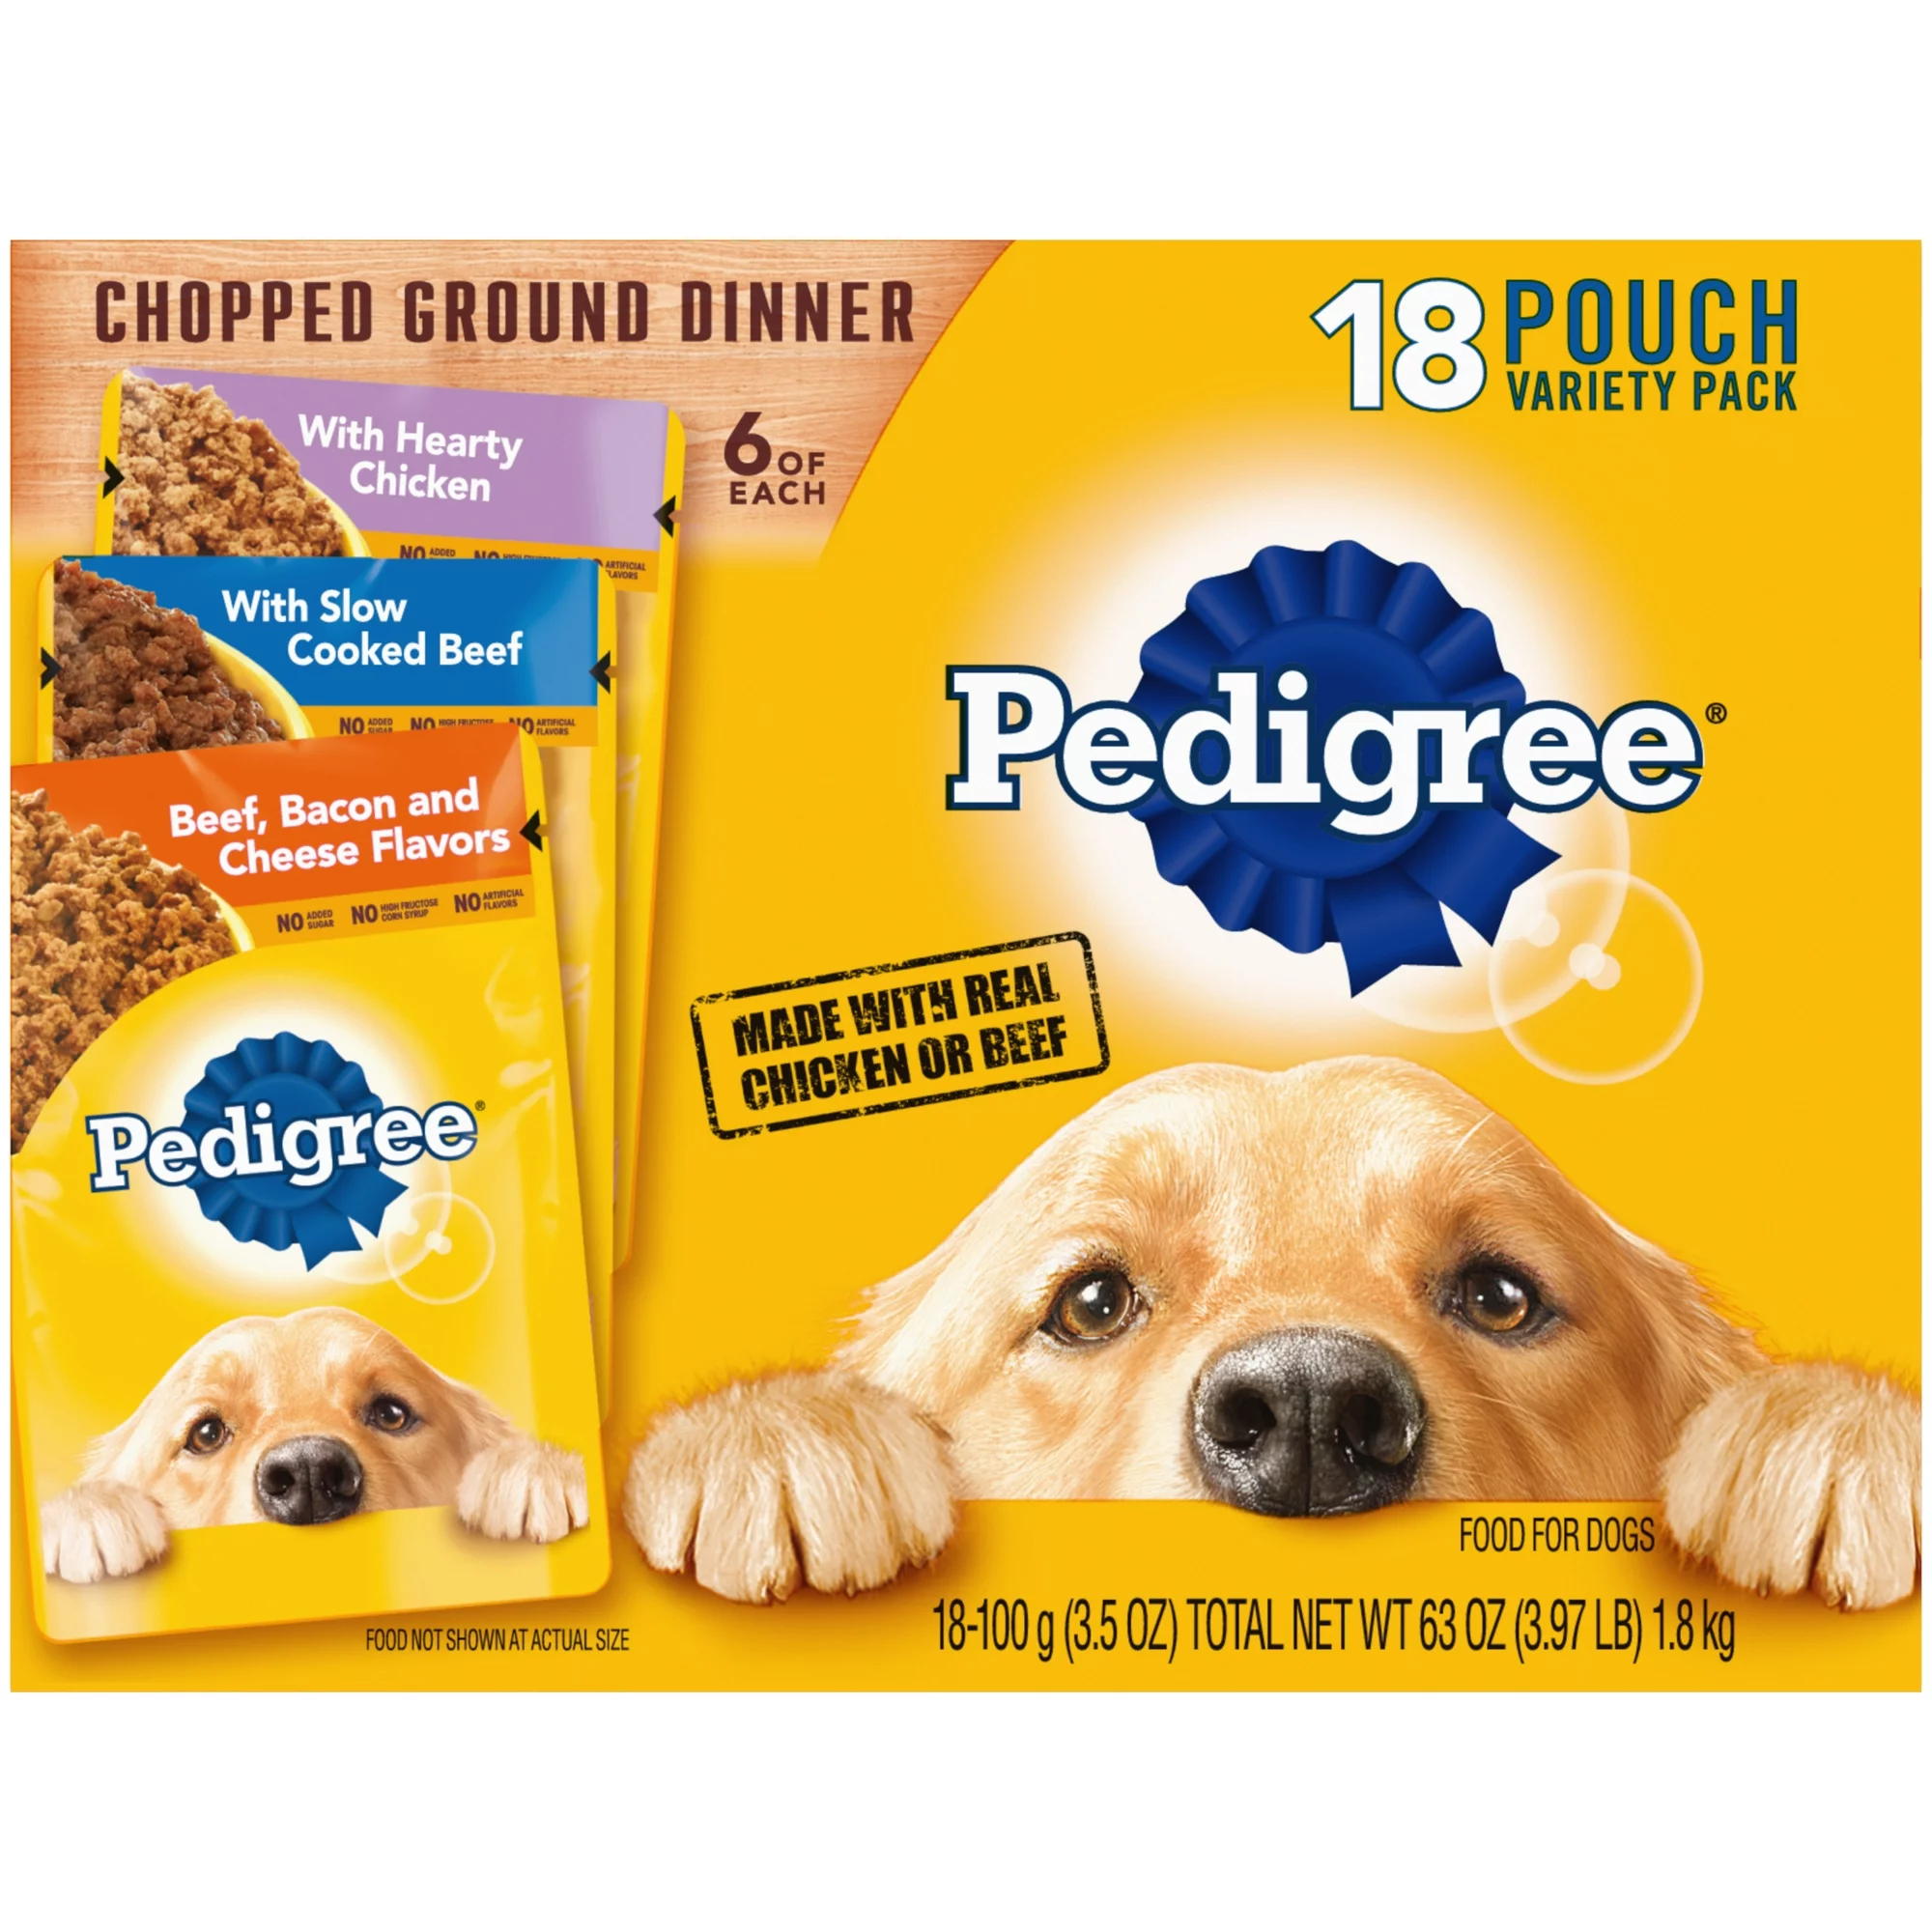 Pedigree Chopped Ground Dinner Meaty Wet Dog Food for Adult Dog Variety Pack 18 3 5 oz Pouches 32cd7b63 0769 4bfc 8558 0bf30c78abe6.2285f951a3f6d4ea97c784152ea12092